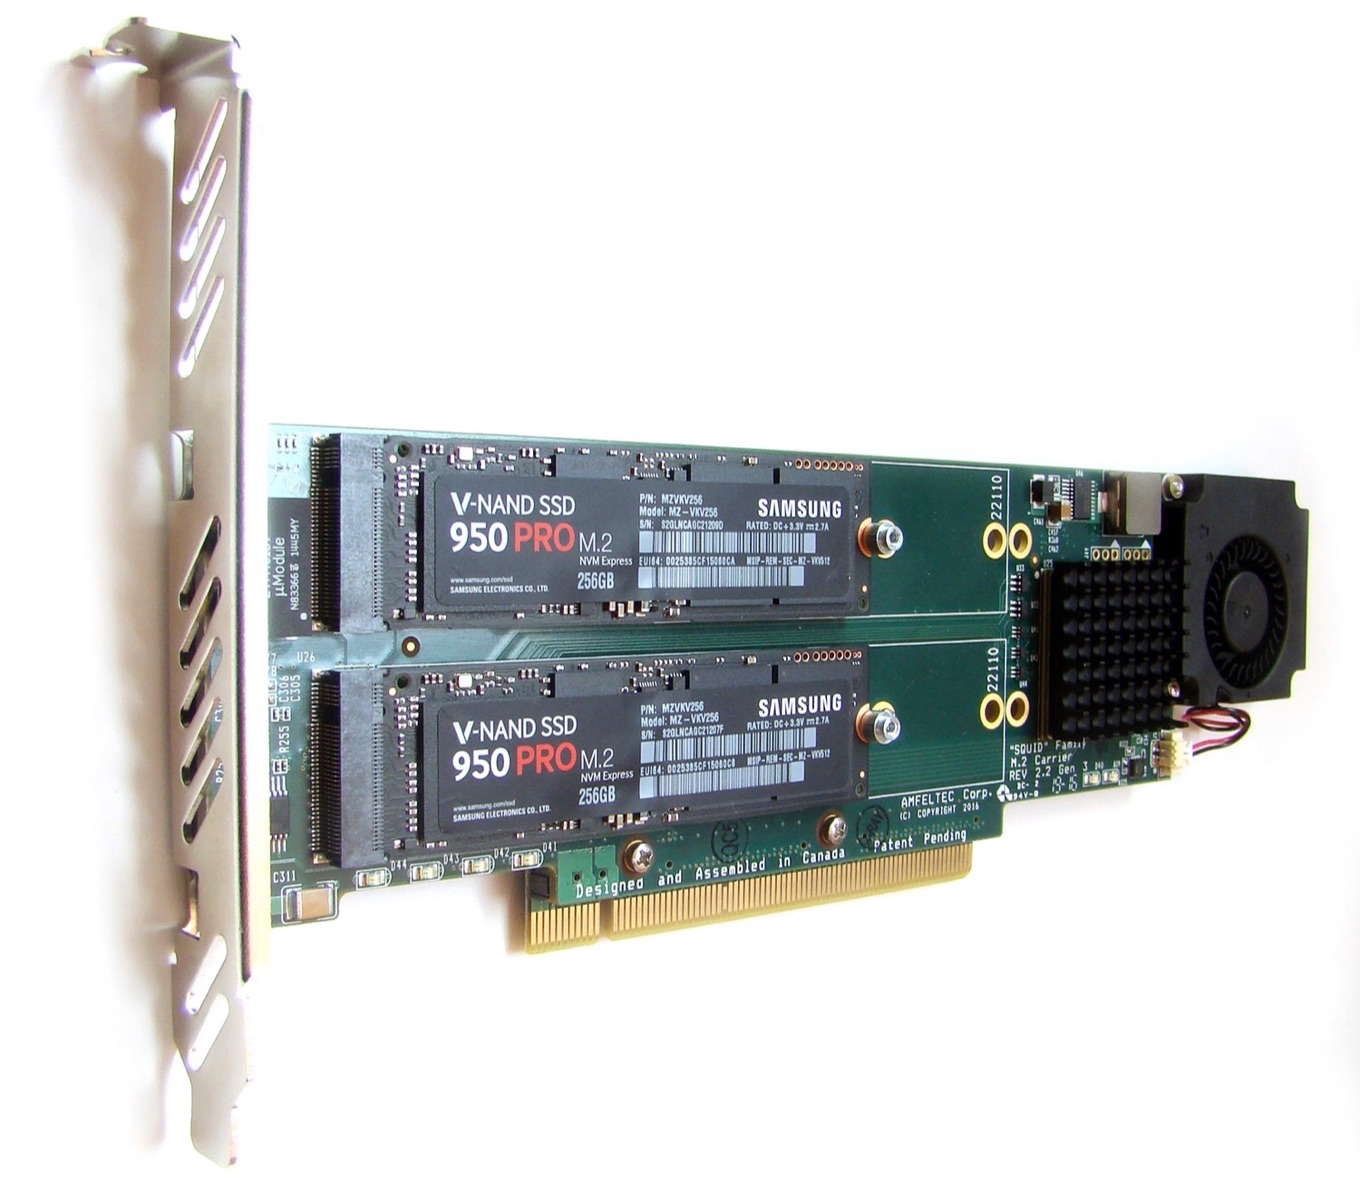 PCI Express Gen 3 Carrier Board for 4 M.2 SSD modules